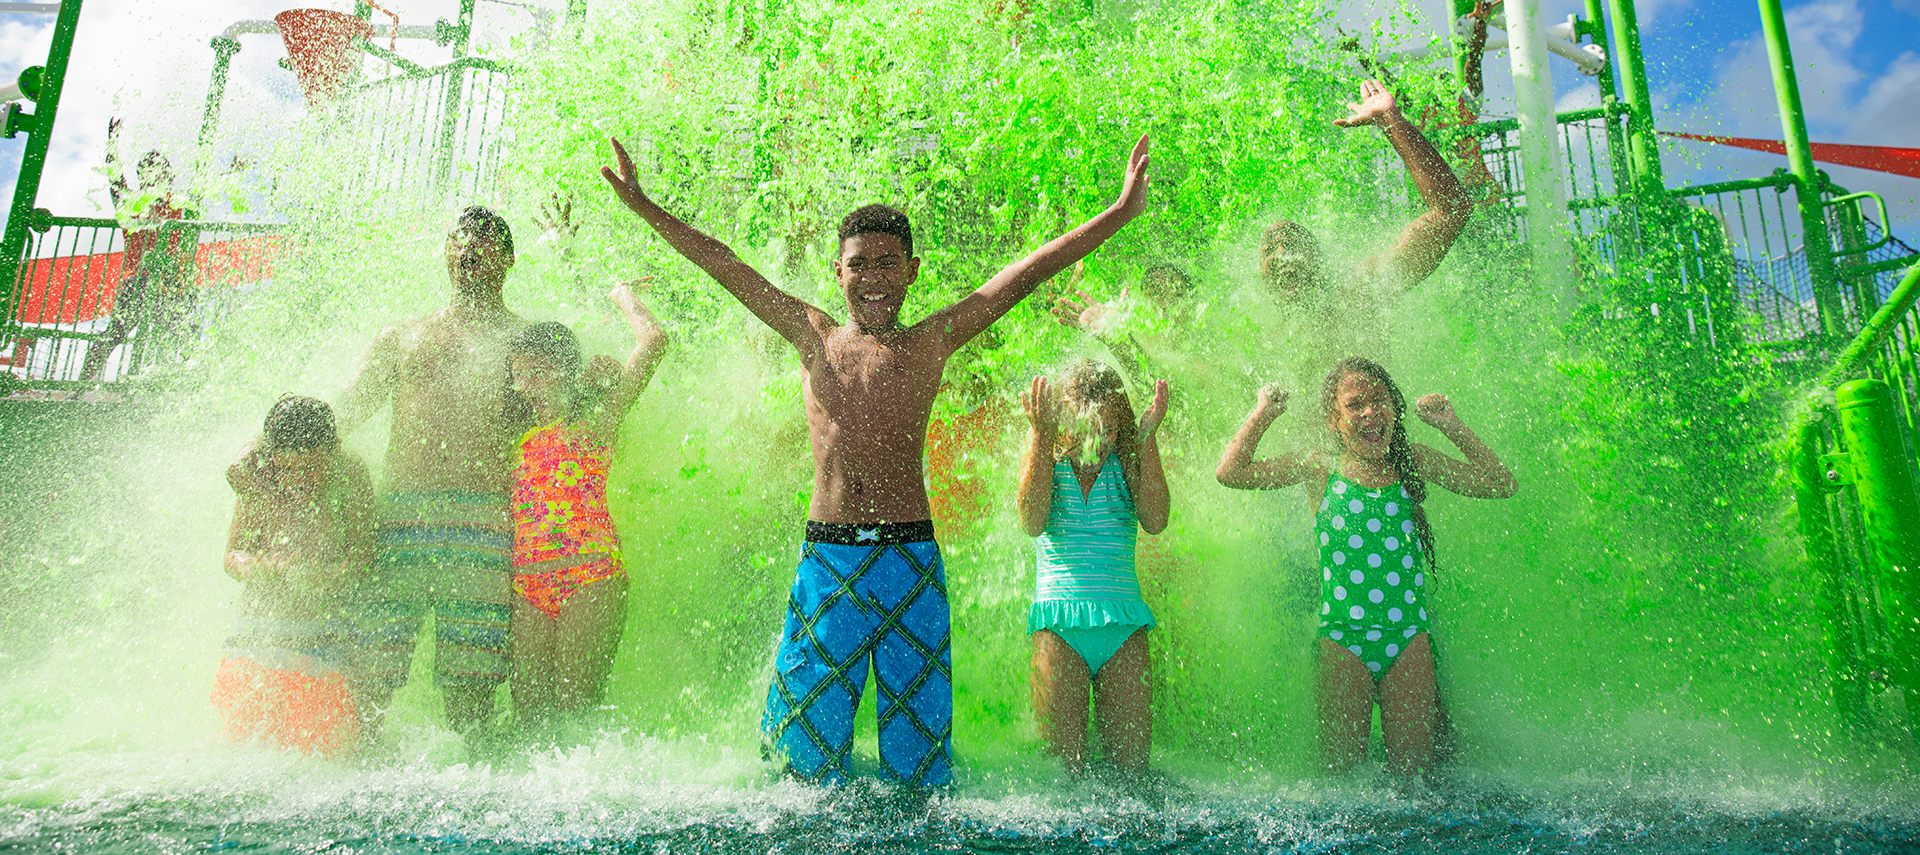 experience nick hotel slime time and stay at nickelodeon punta cana dominican republic